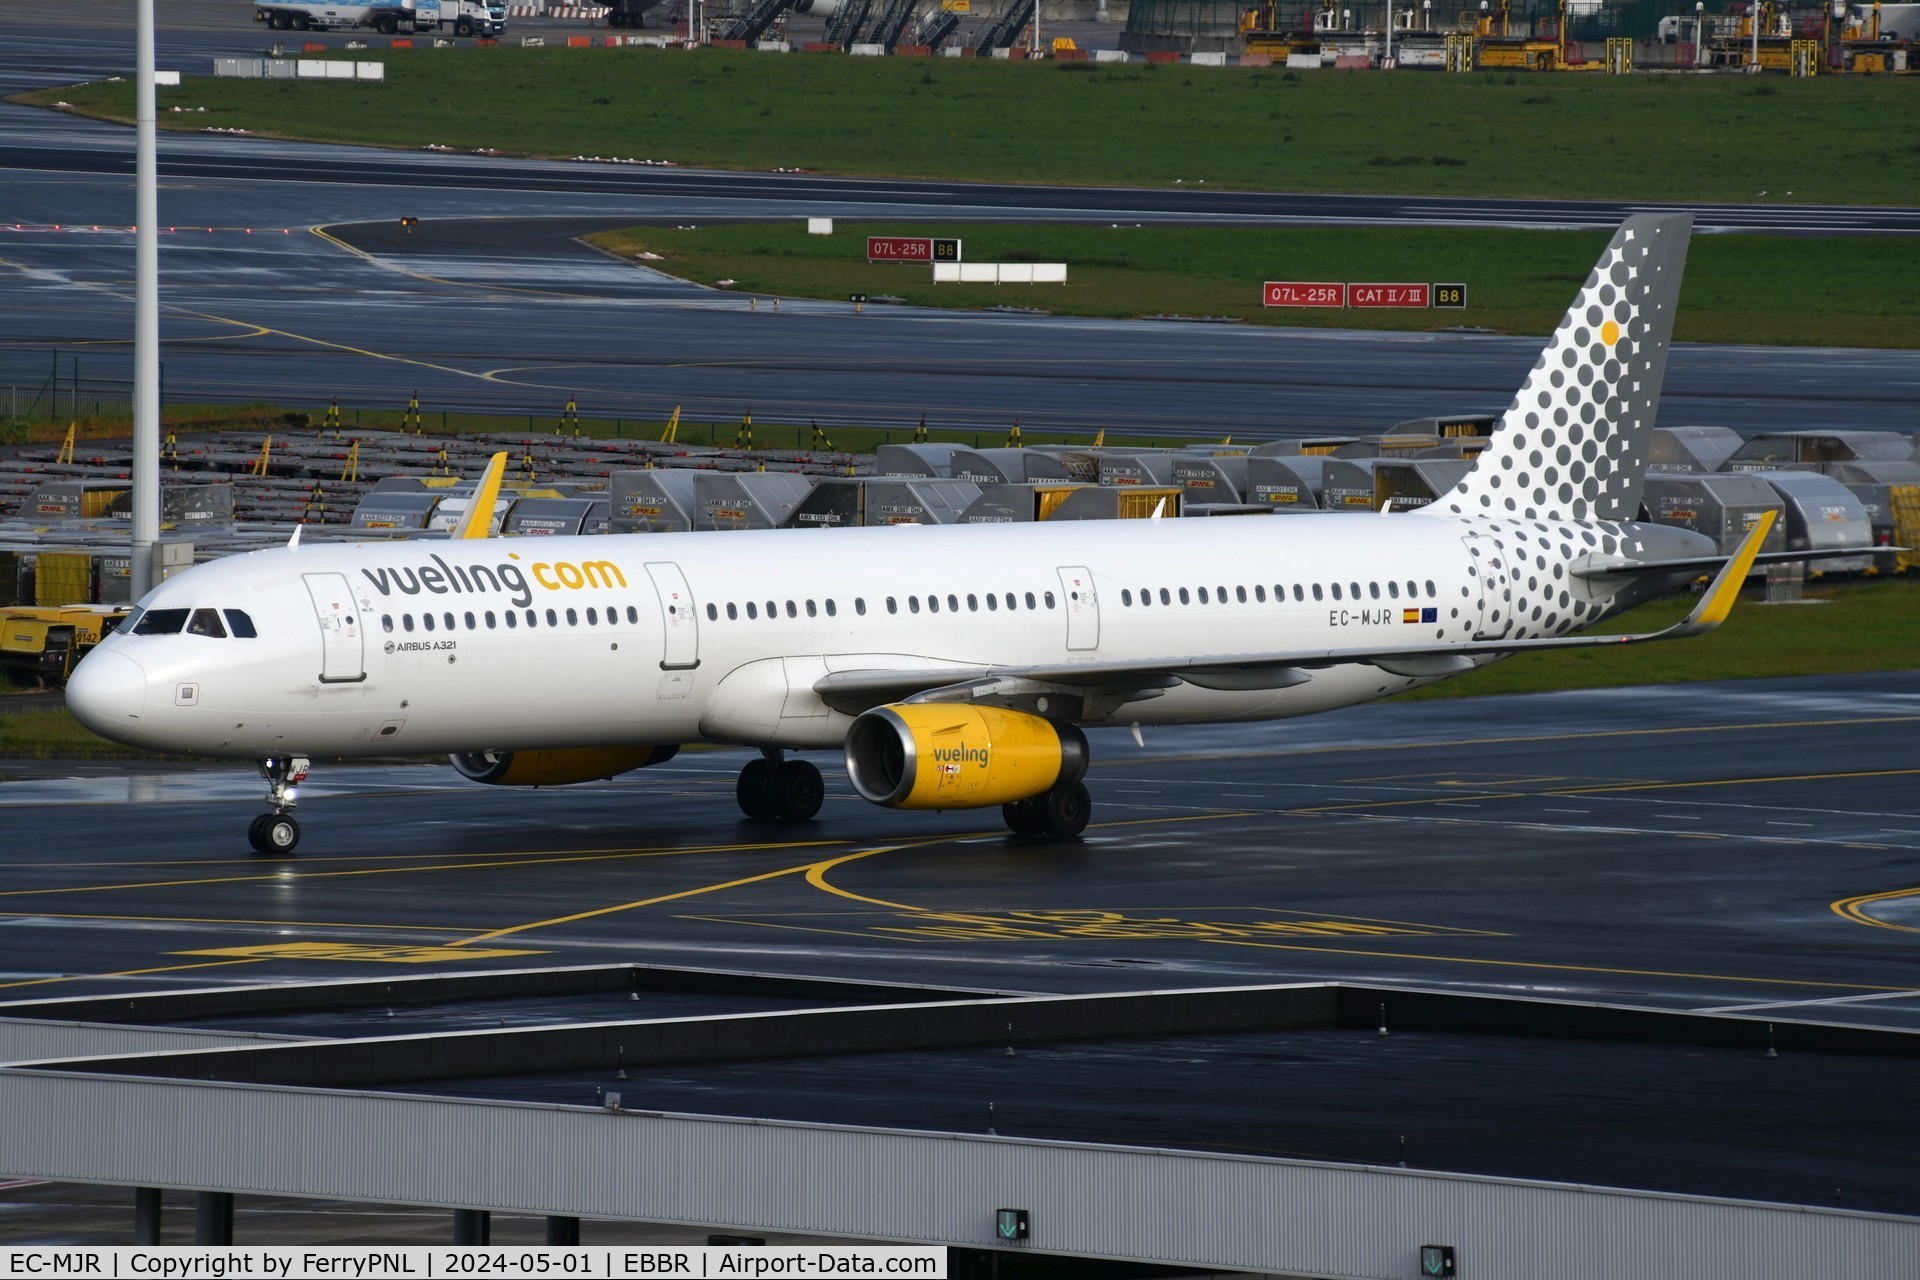 EC-MJR, 2016 Airbus A321-231 C/N 6933, Arrival of Vueling A321